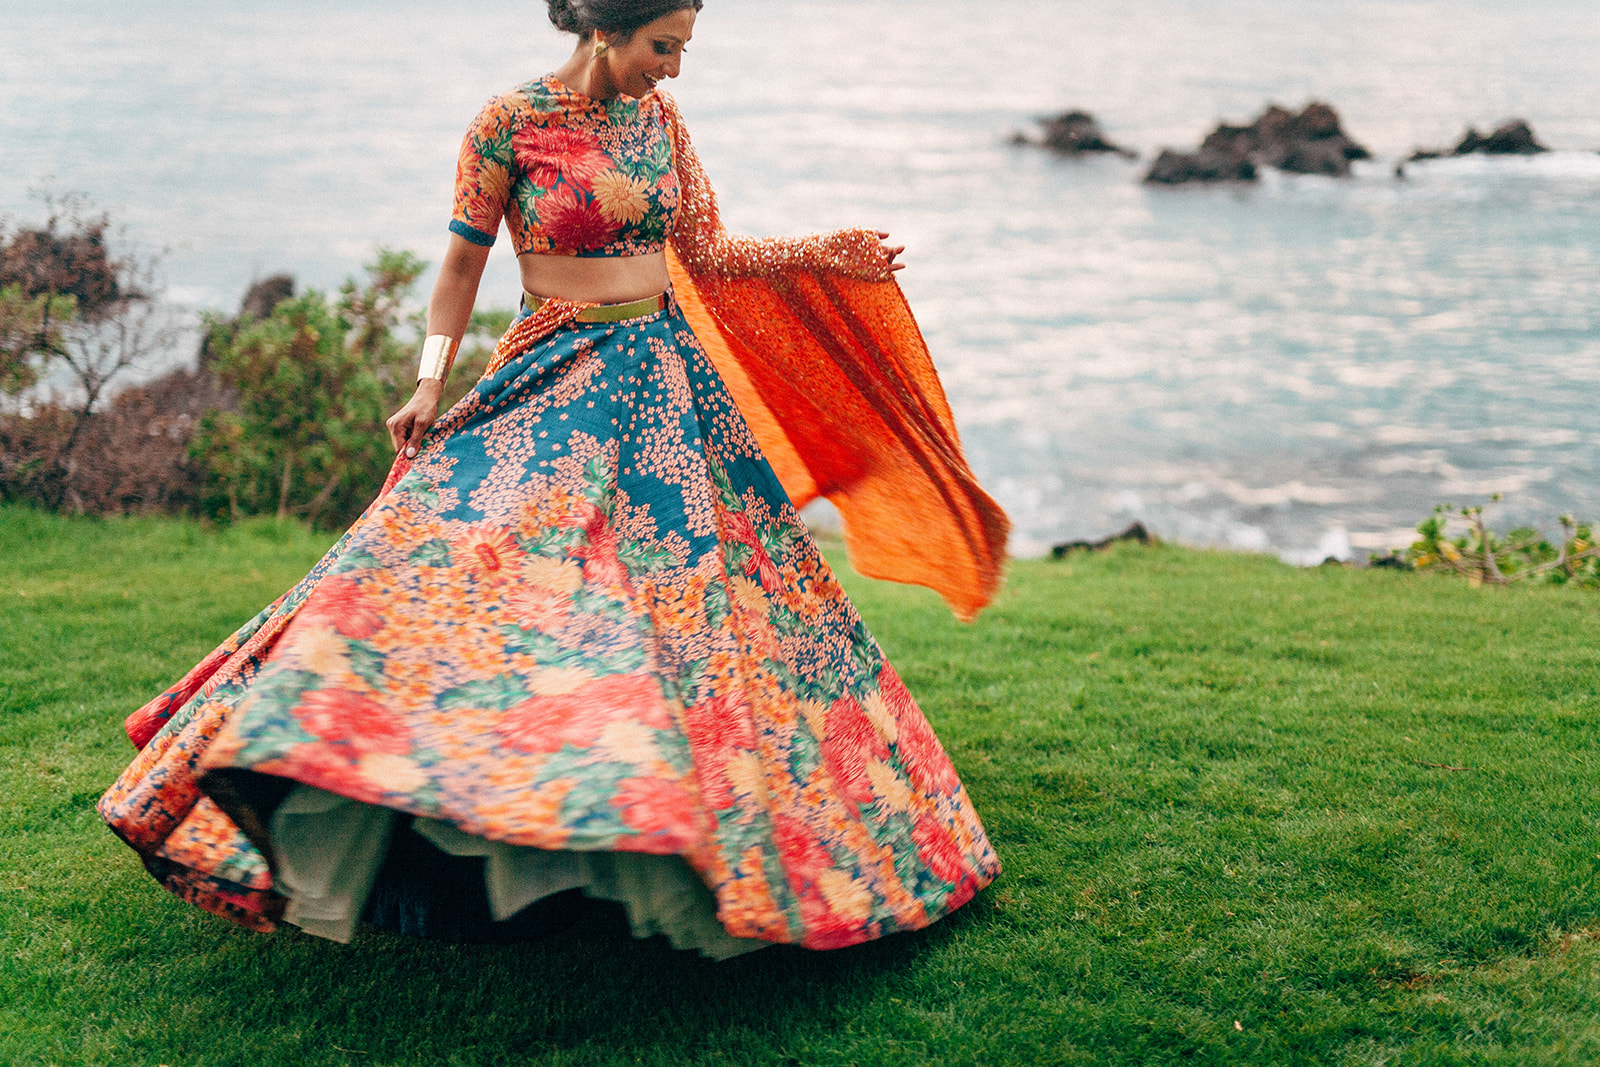 Bride twirling in her colorful custom Indian wedding dress in South Maui